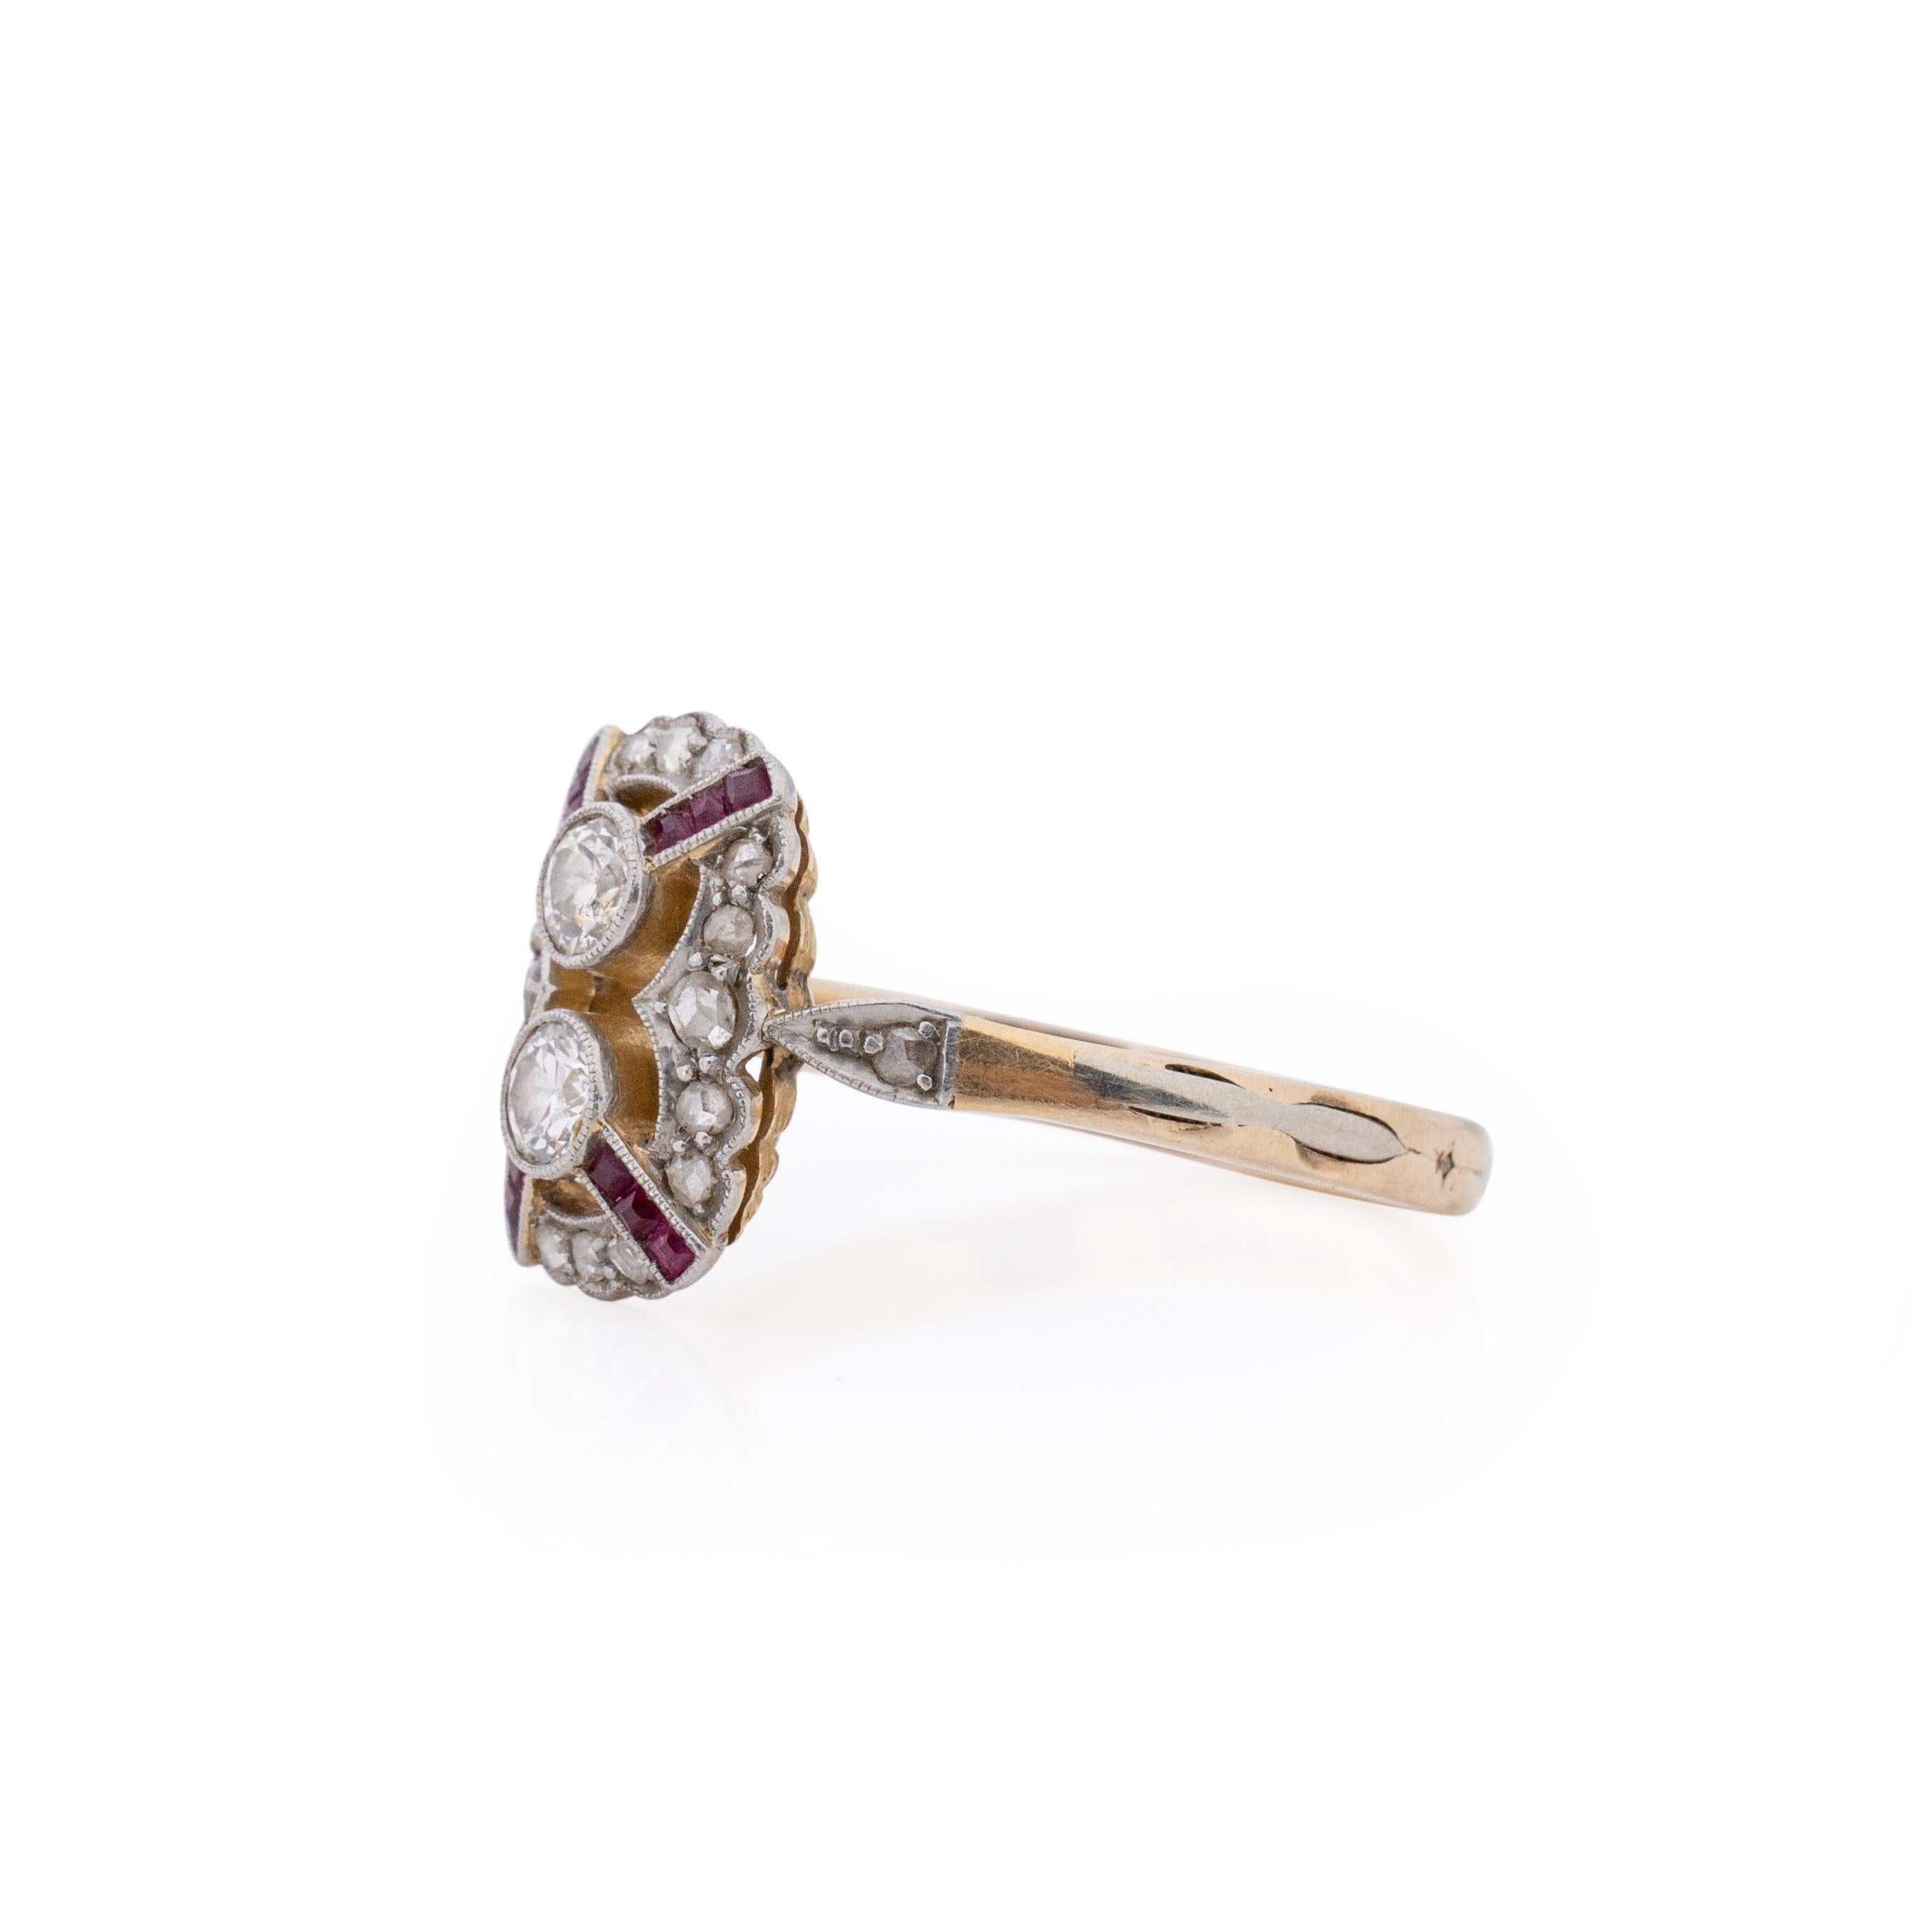 A piece worthy of royalty. Here we have a small shield ring from the art deco era, the two tone ring is crafted in 14K with beautiful color and detail. The shield its self has fantastic scalloped edges, in the center of the rectangle is vibrant ruby